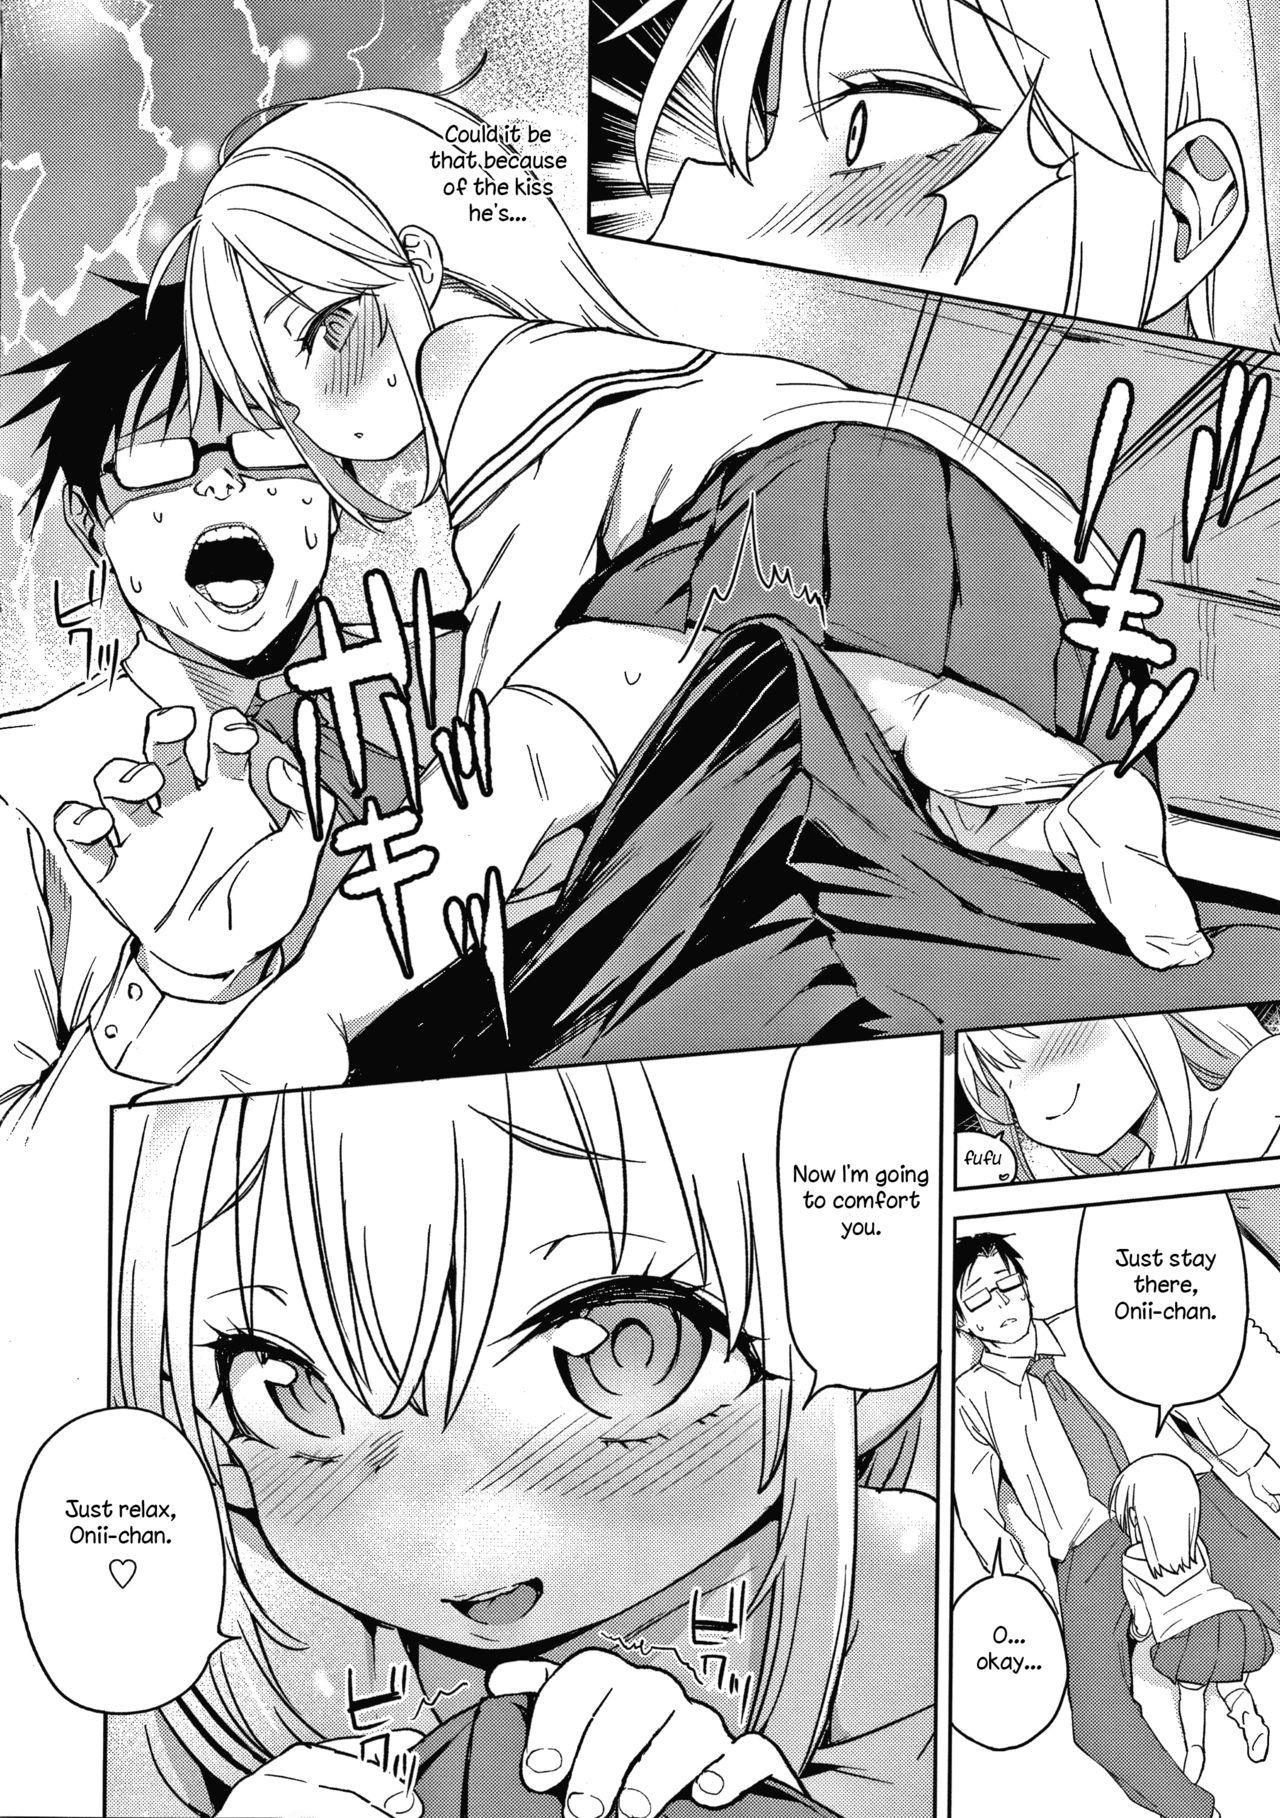 Penis Imouto wa Amma Ama | My Little Sister Is So Gentle! Rimming - Page 8